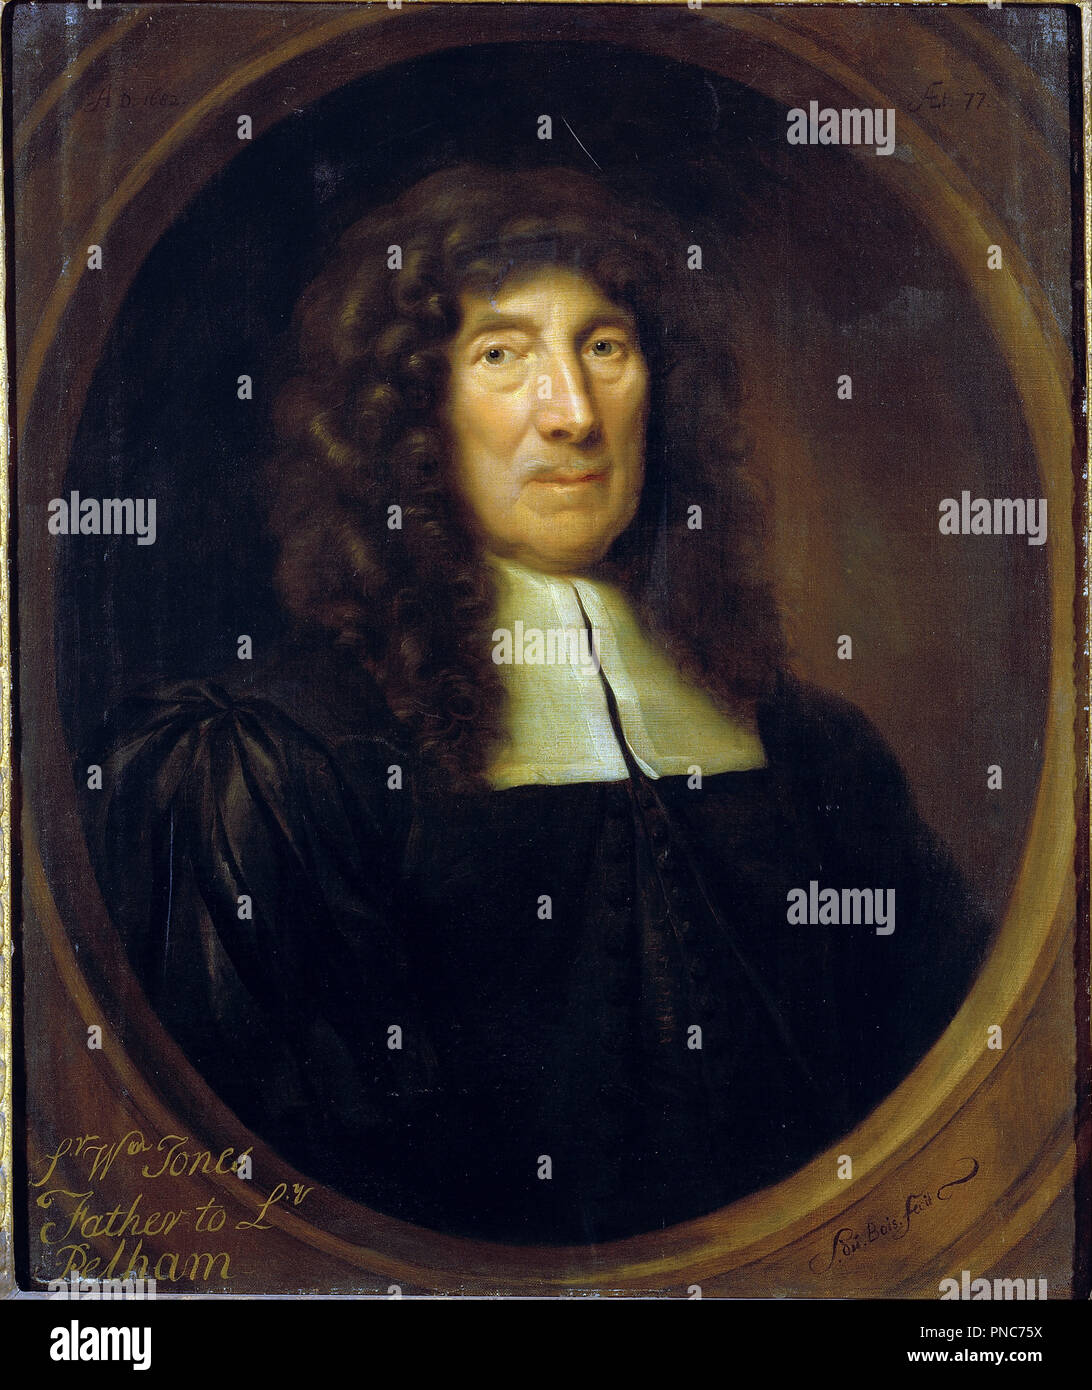 Sir William Jones Kt. Date/Period: 1682. Painting. Oil on canvas Oil. Height: 759 mm (29.88 in); Width: 632 mm (24.88 in). Author: Dubois, Simon. Simon Dubois. Stock Photo